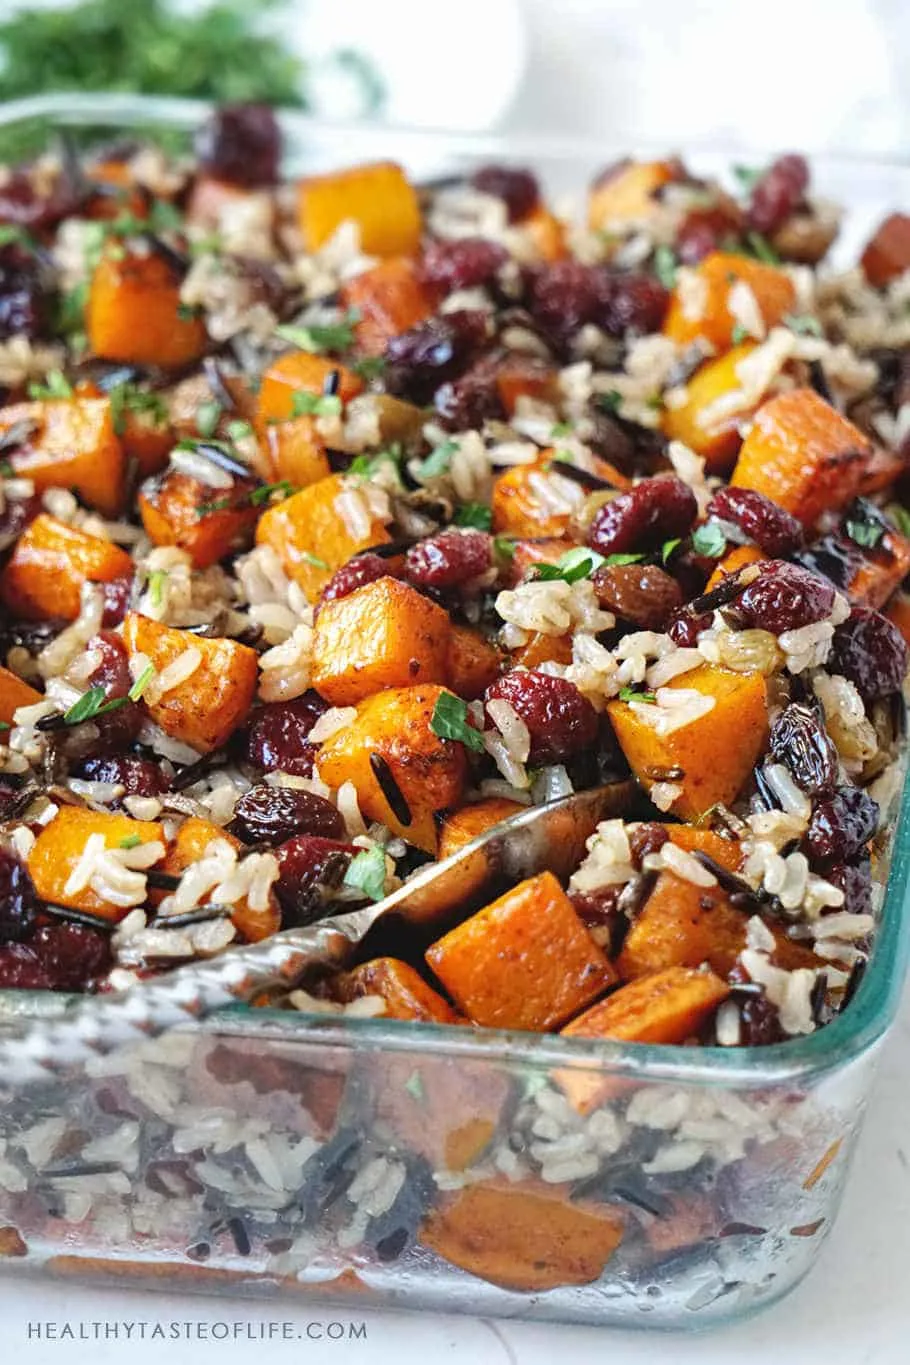 Butternut squash casserole recipe  with roasted sweet potatoes, butternut squash, cranberries, raisins complemented by earthiness of brown rice and wild rice and finished with balsamic sauce. A healthy side dish or meal during fall or holiday season (Thanksgiving or Christmas).